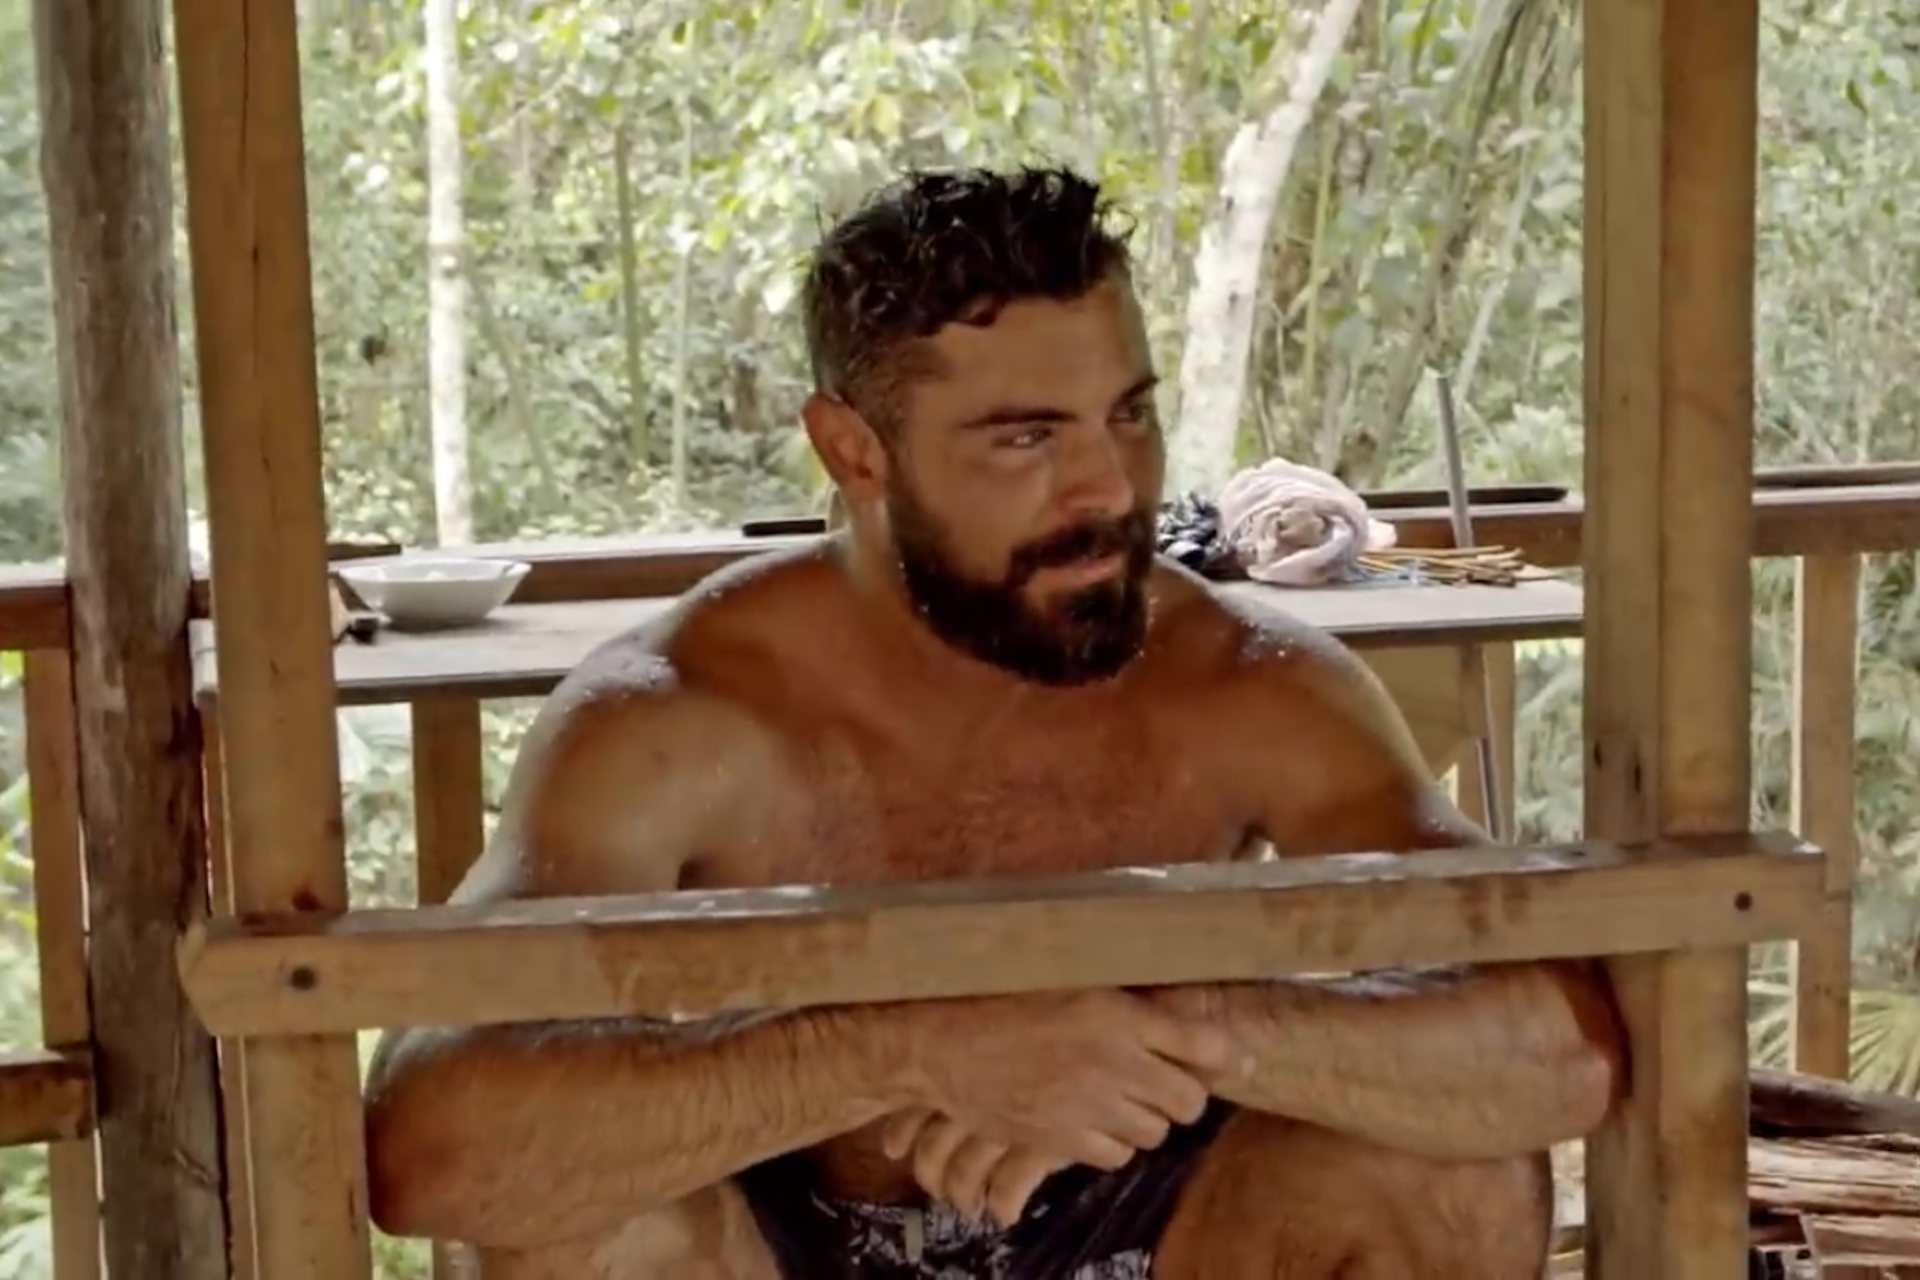 A shirtless Zac Efron sitting in a wooden frame